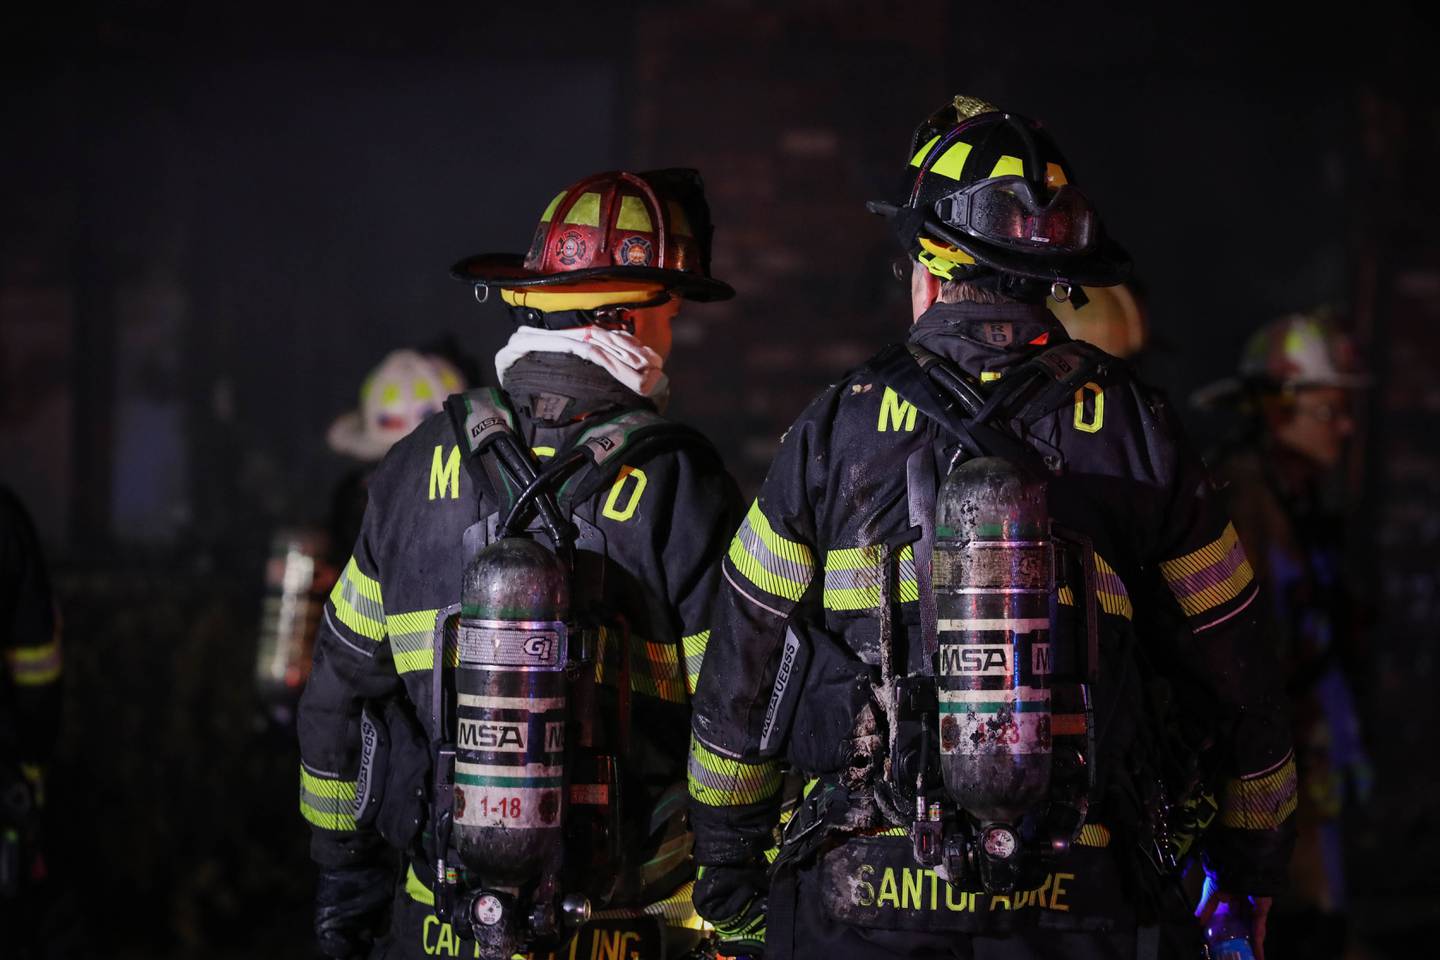 Firefighters from the McHenry Township Fire Protection District respond to a house fire Saturday, Dec. 11, 2021, in the 500 block of Sunrise Drive in unincorporated McHenry County near Johnsburg.